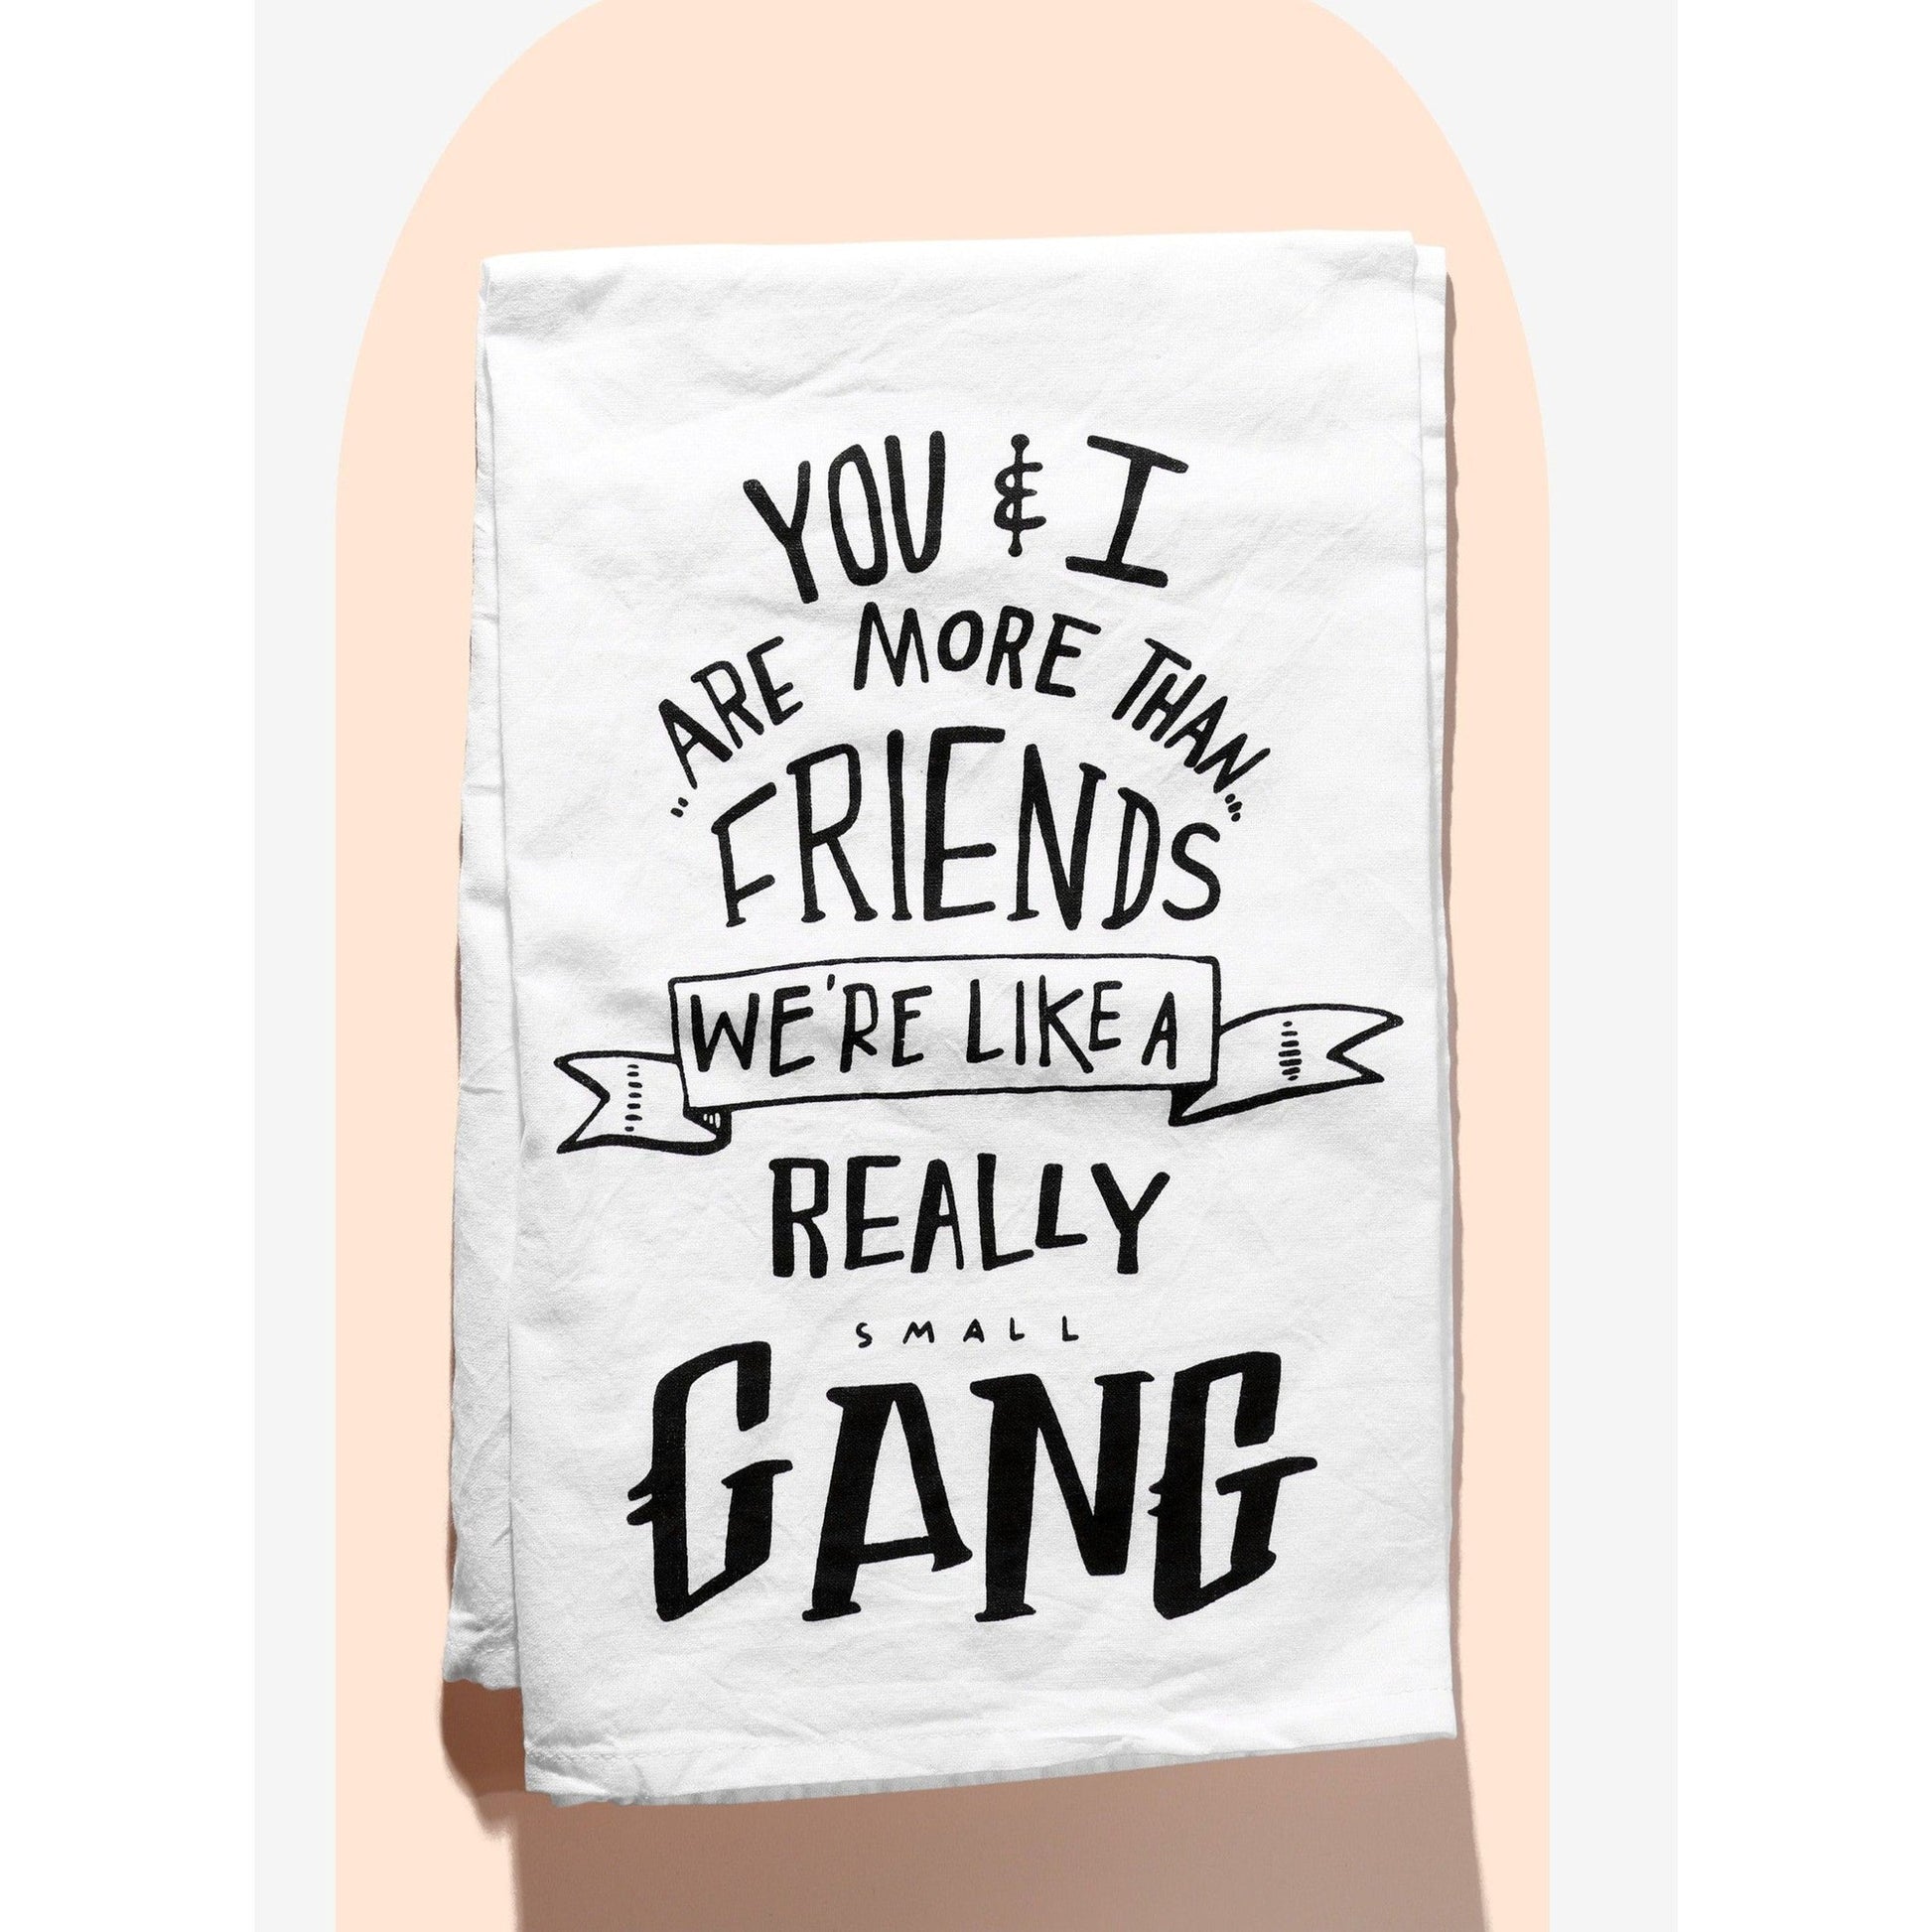 You & I Are More Than Friends, We're Like a Really Small Gang Funny Snarky Dish Cloth Towel